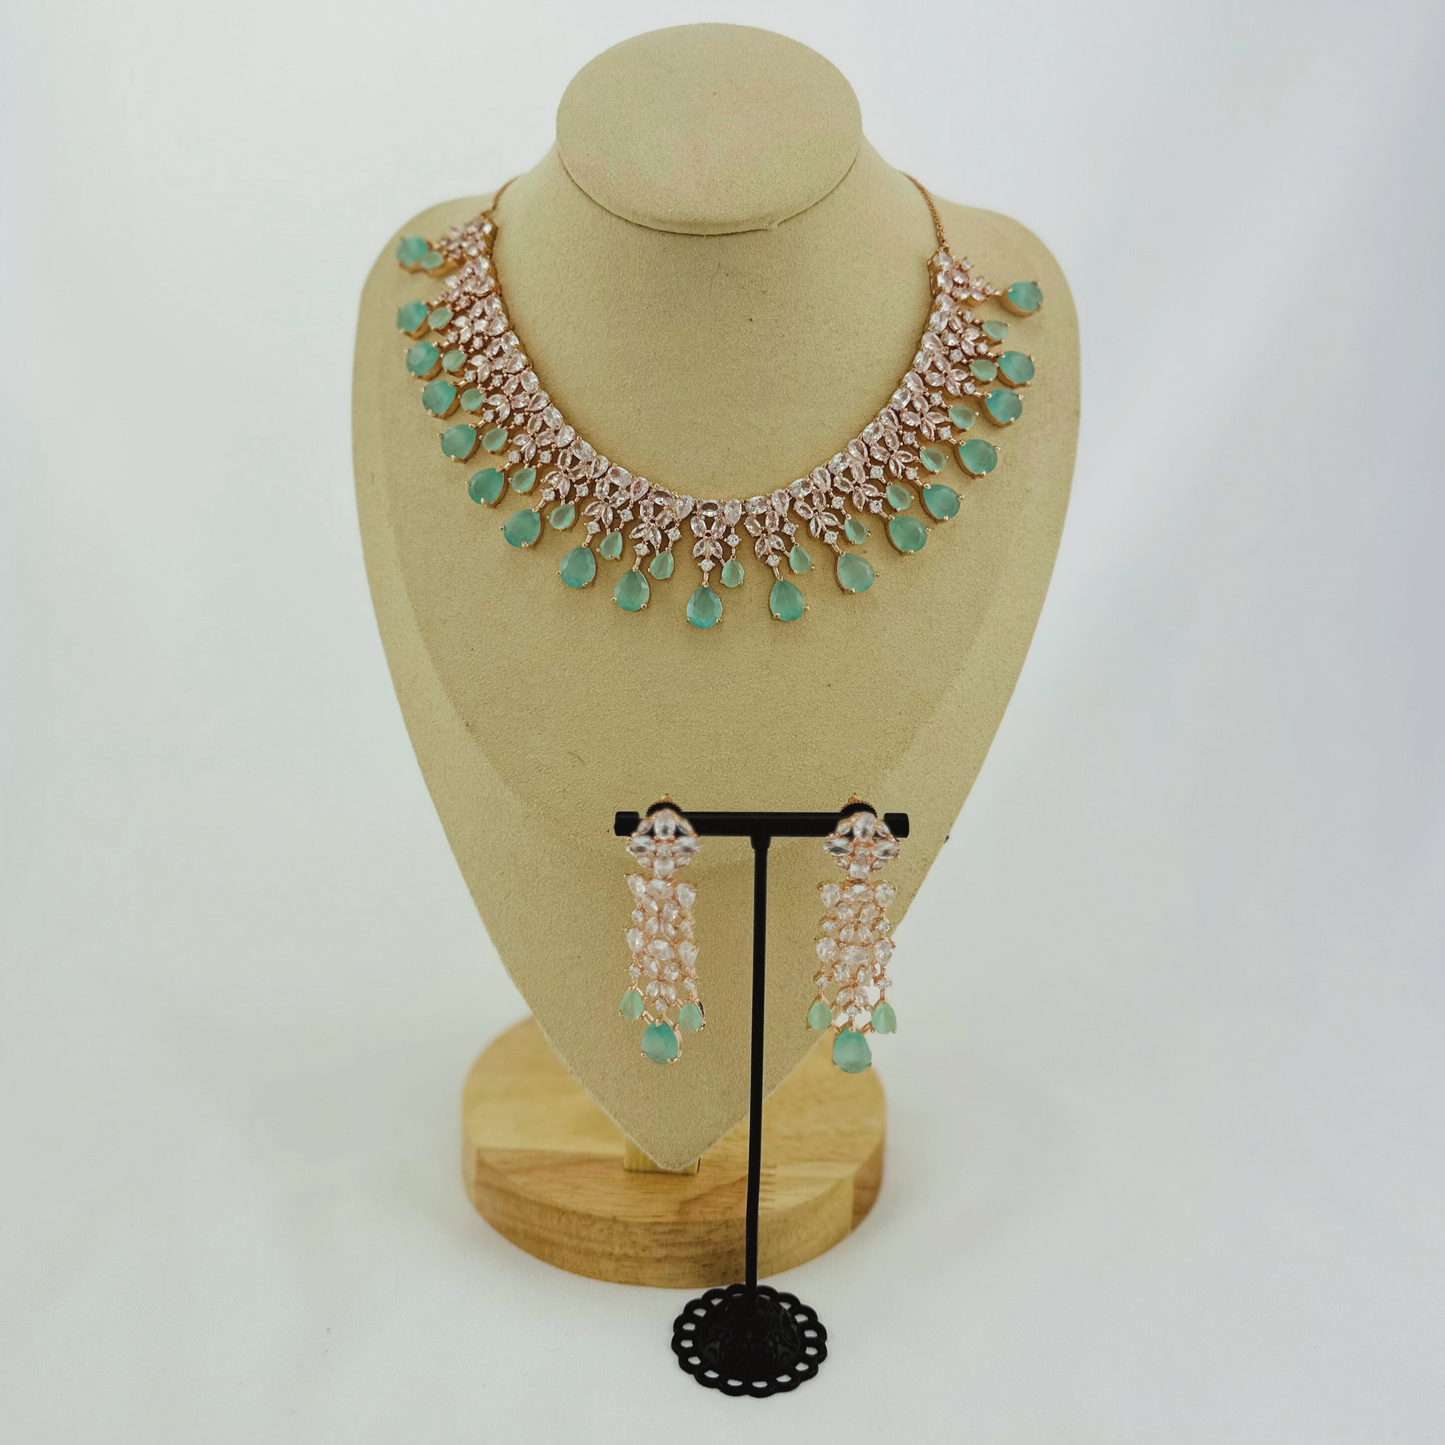 Rosegold necklace set with light blue and clear stones.  Set includes necklace & earrings.  Prefect for Indian weddings, parties and special occasions.   Latest 2023 fashion. High end Indian fashion jewellery with top quality stones and beads.